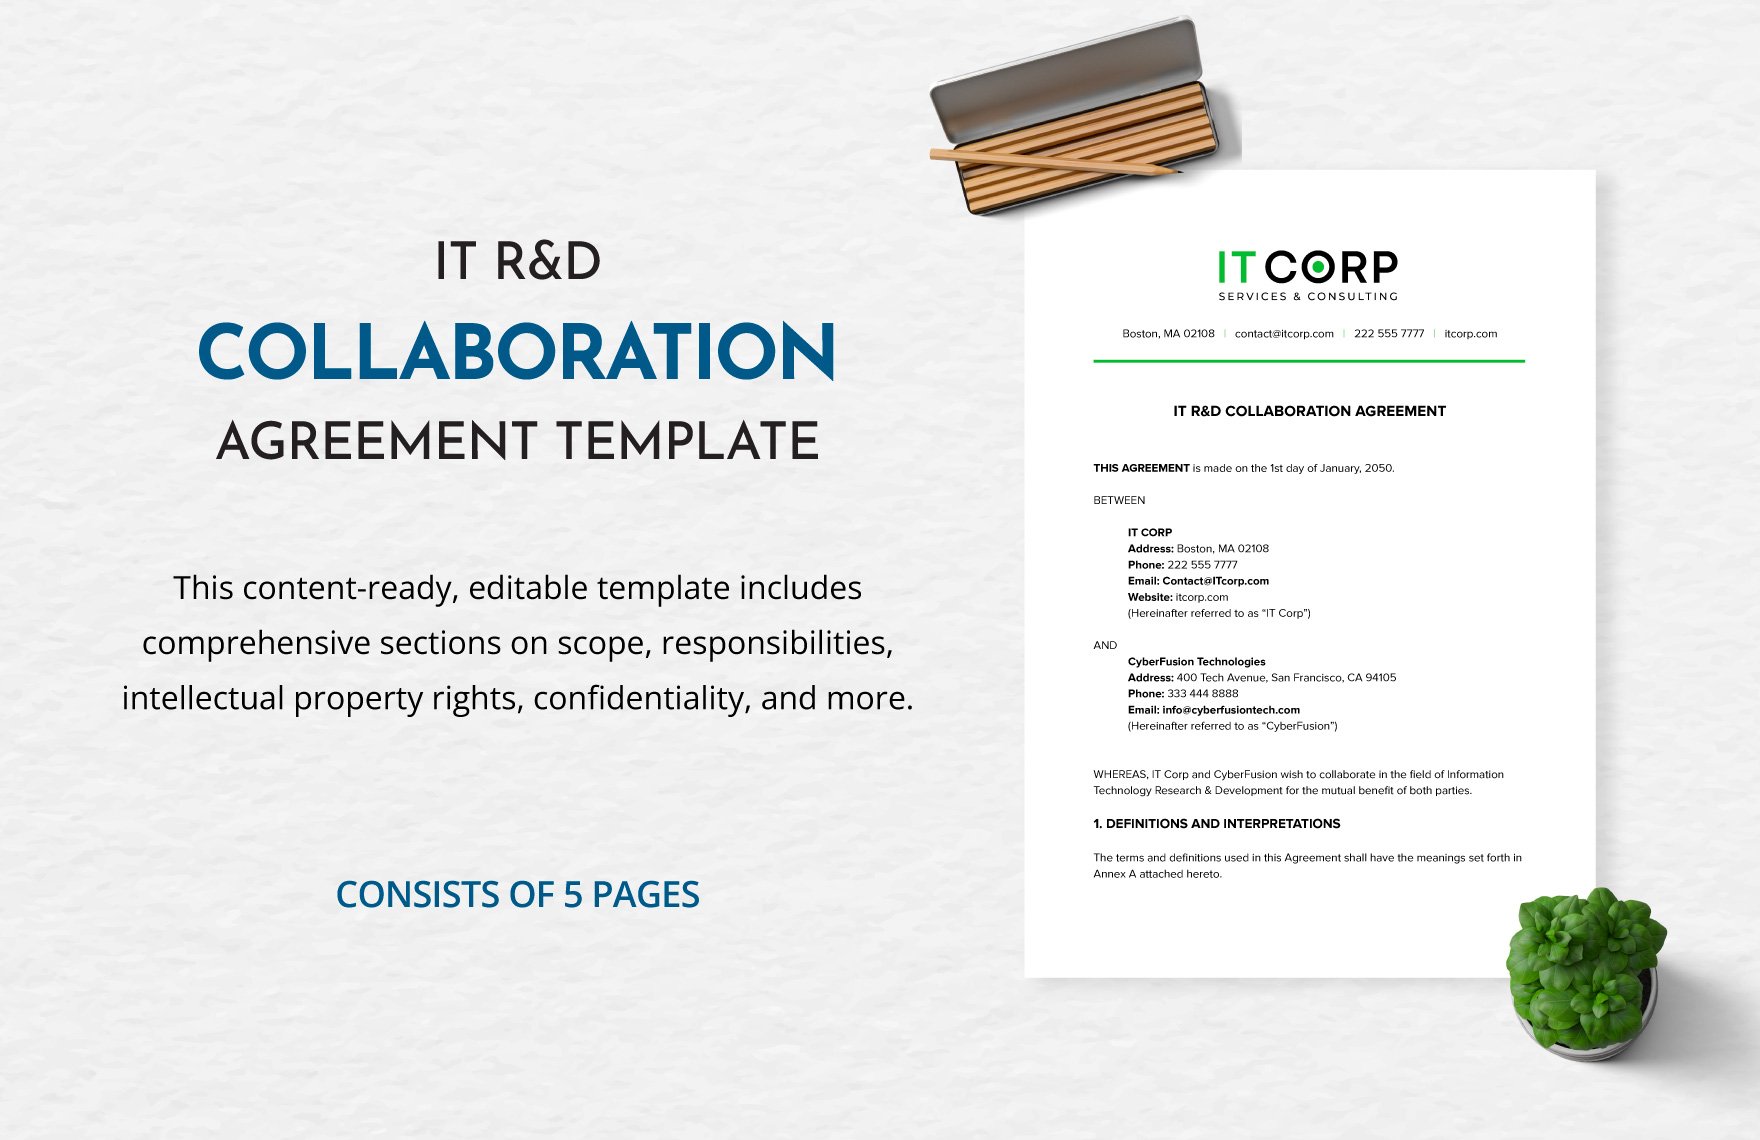 IT R&D Collaboration Agreement Template in Word, Google Docs, PDF